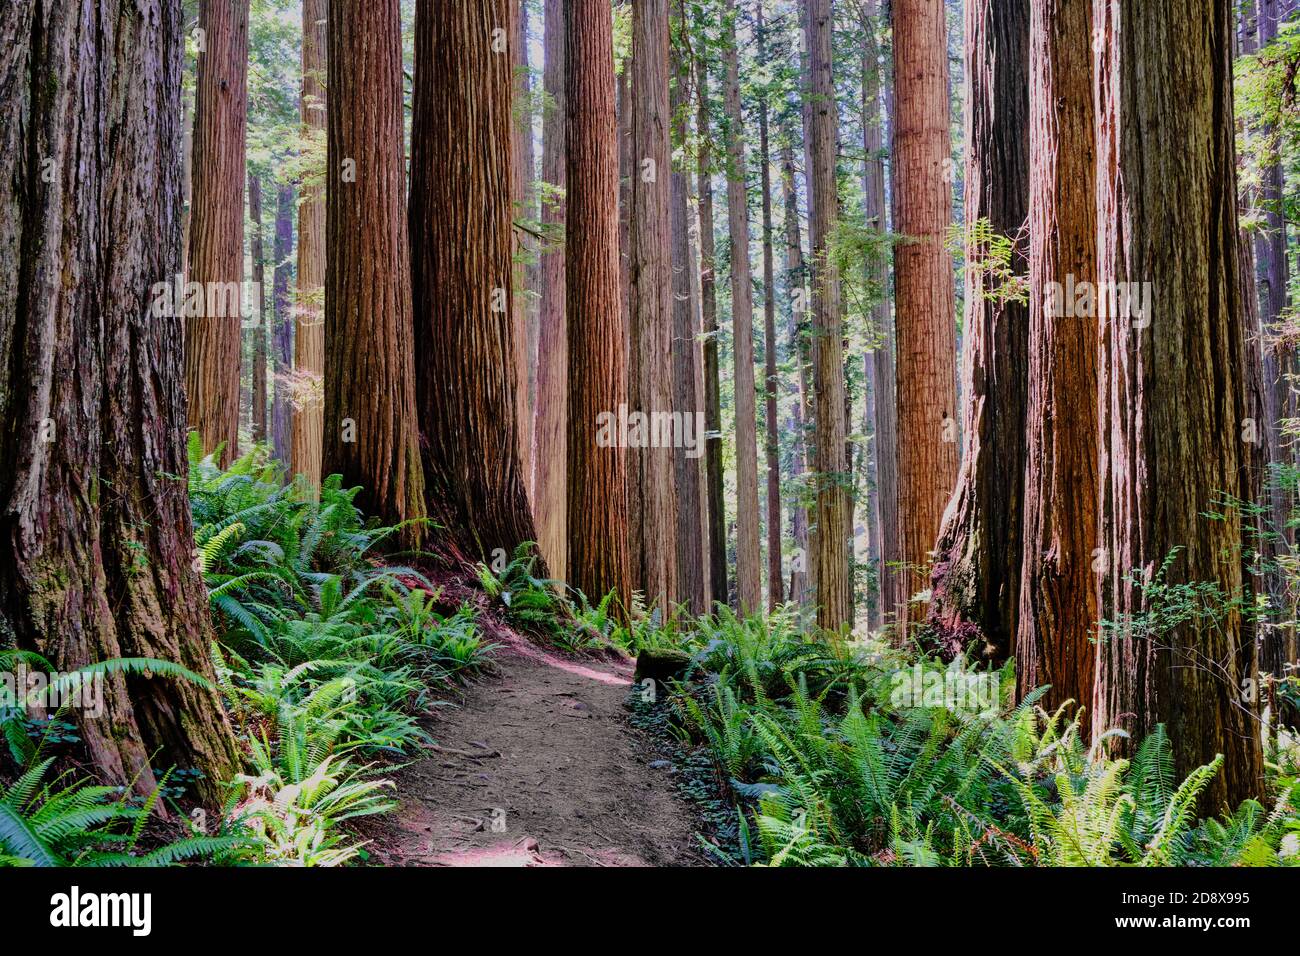 Bright green ferns on forest floor beside hiking trail contrast with very tall, thick and straight trunks of California's mighty Redwoods. Stock Photo